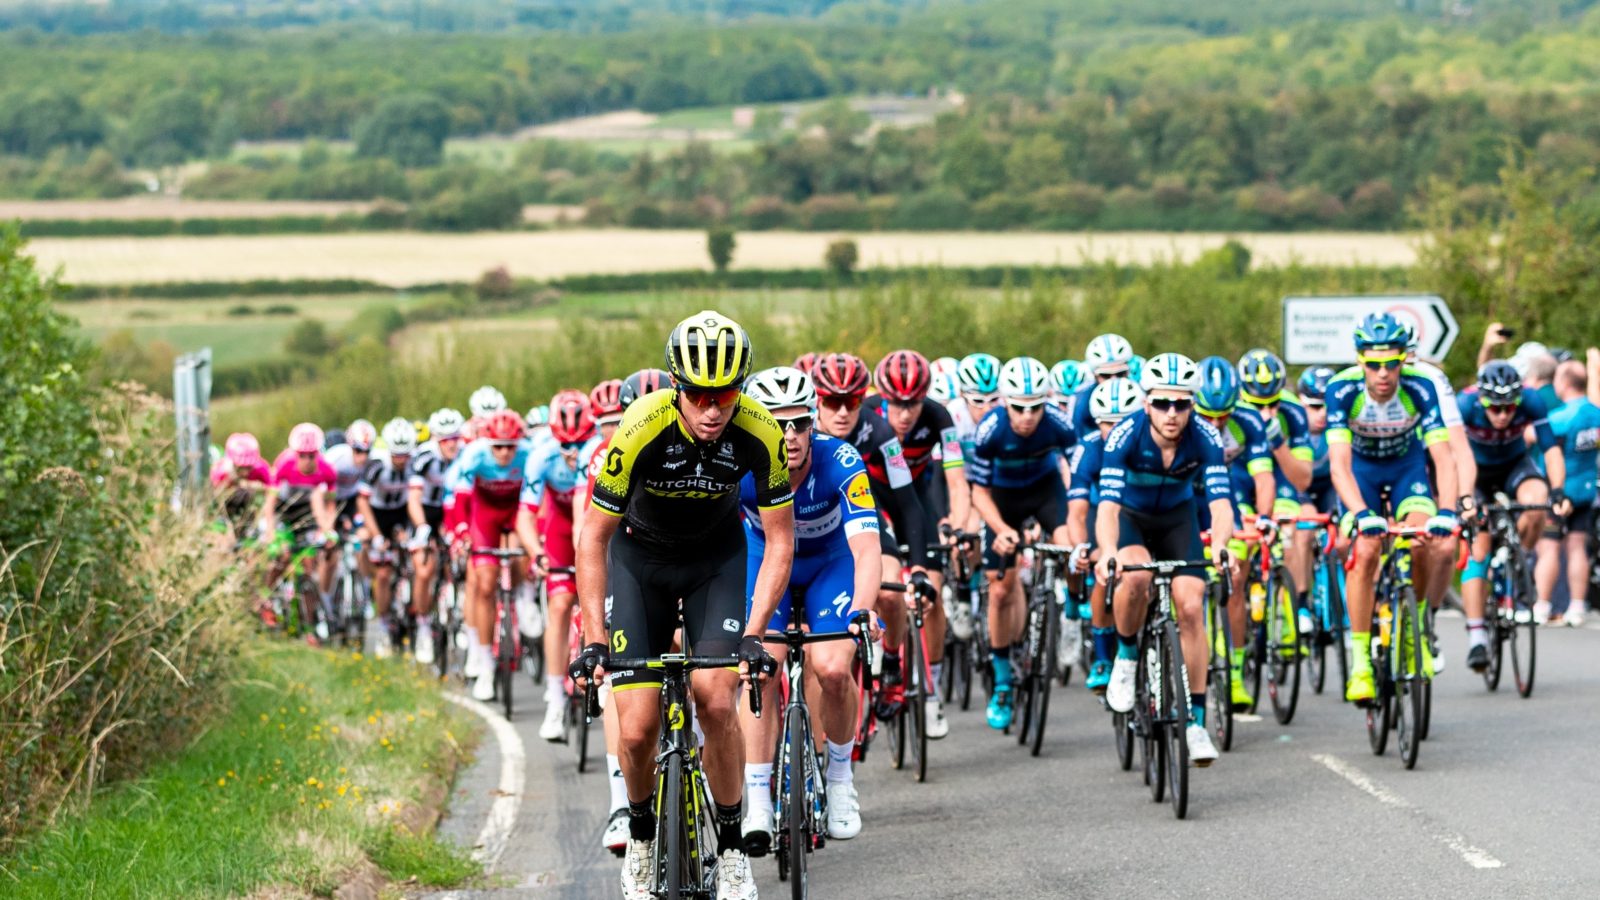 Businesses asked to get creative to support the Tour of Britain when it arrives next month